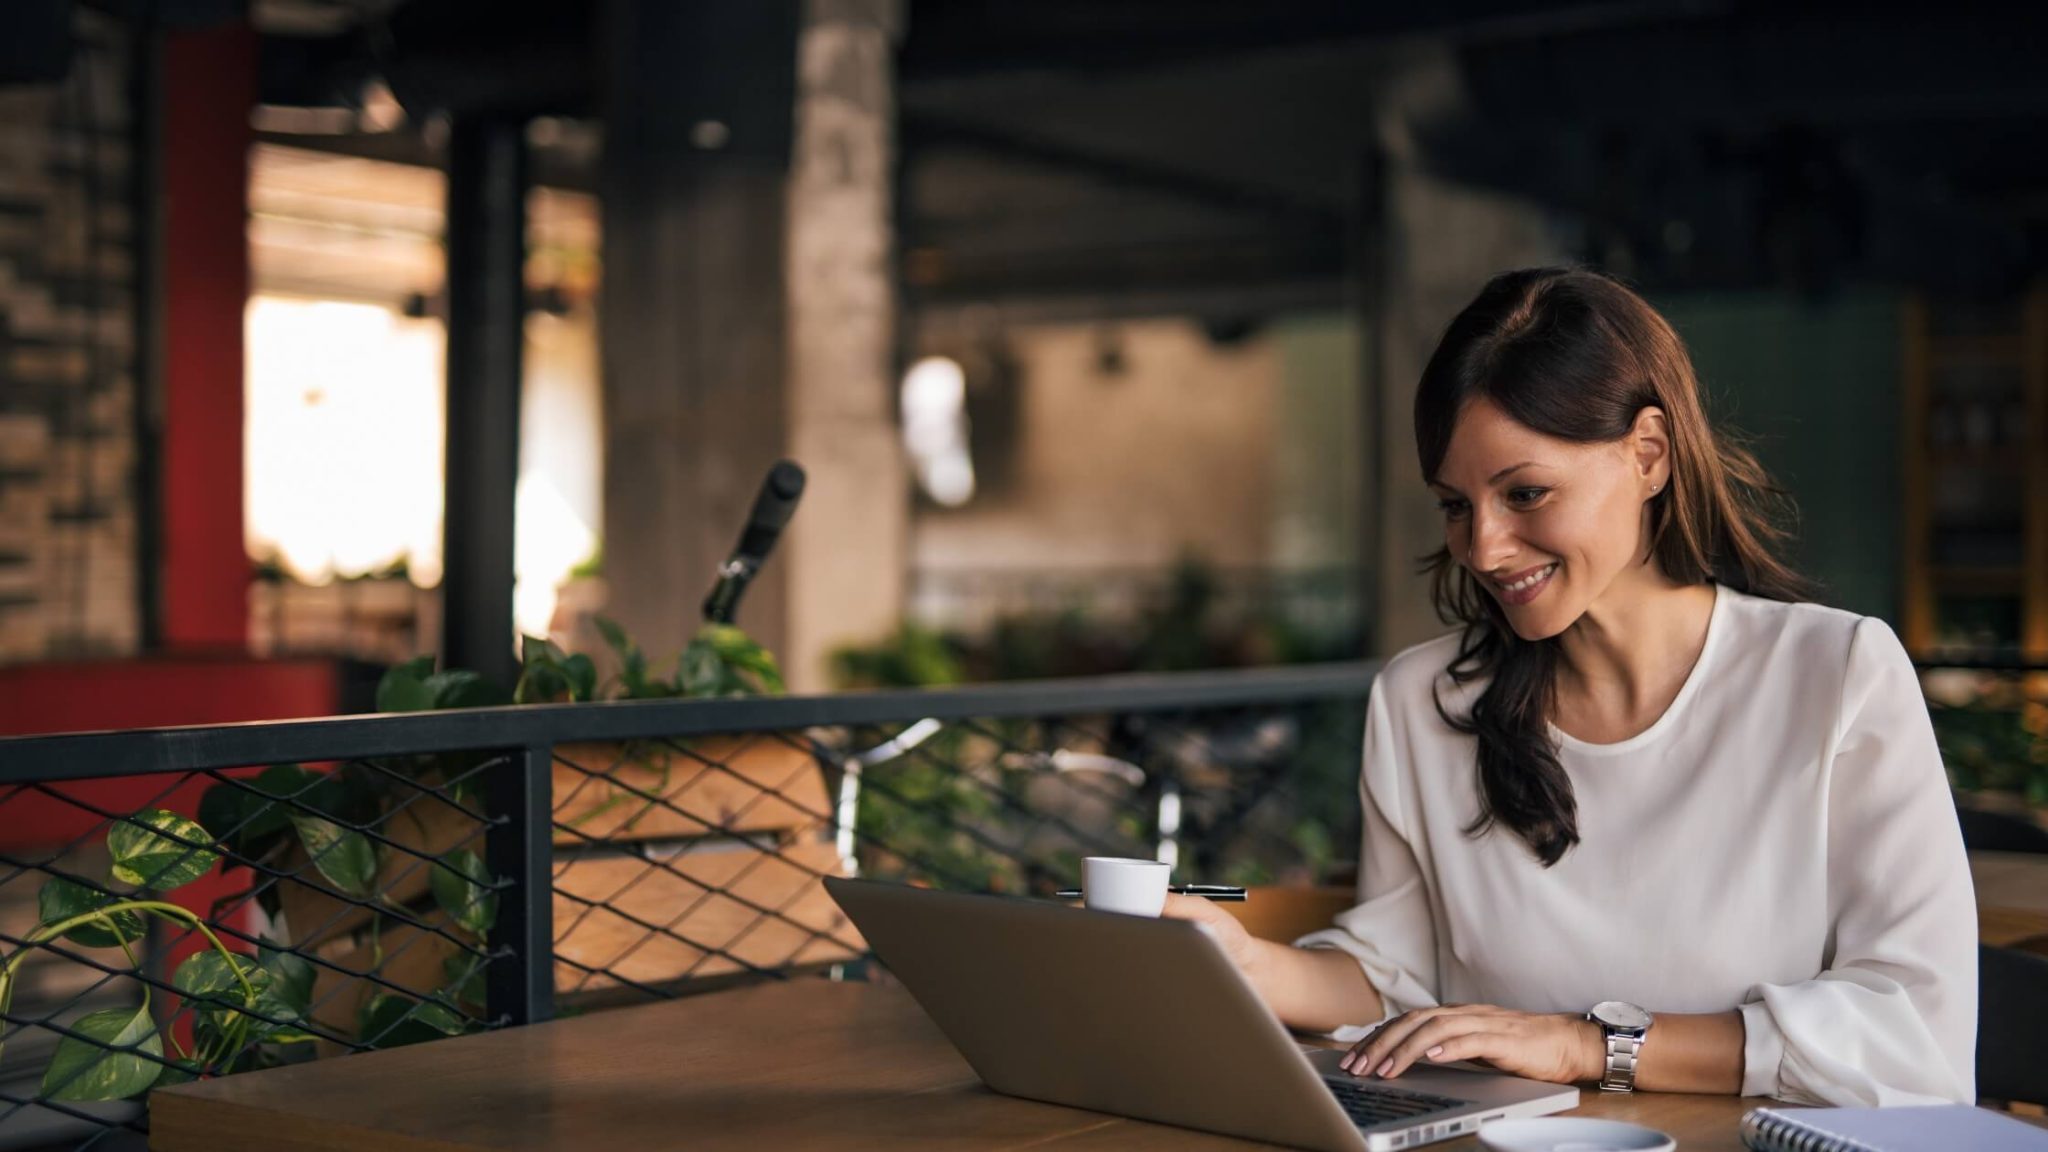 Well-dressed woman working with her laptop outdoors in a warm and dark environment.